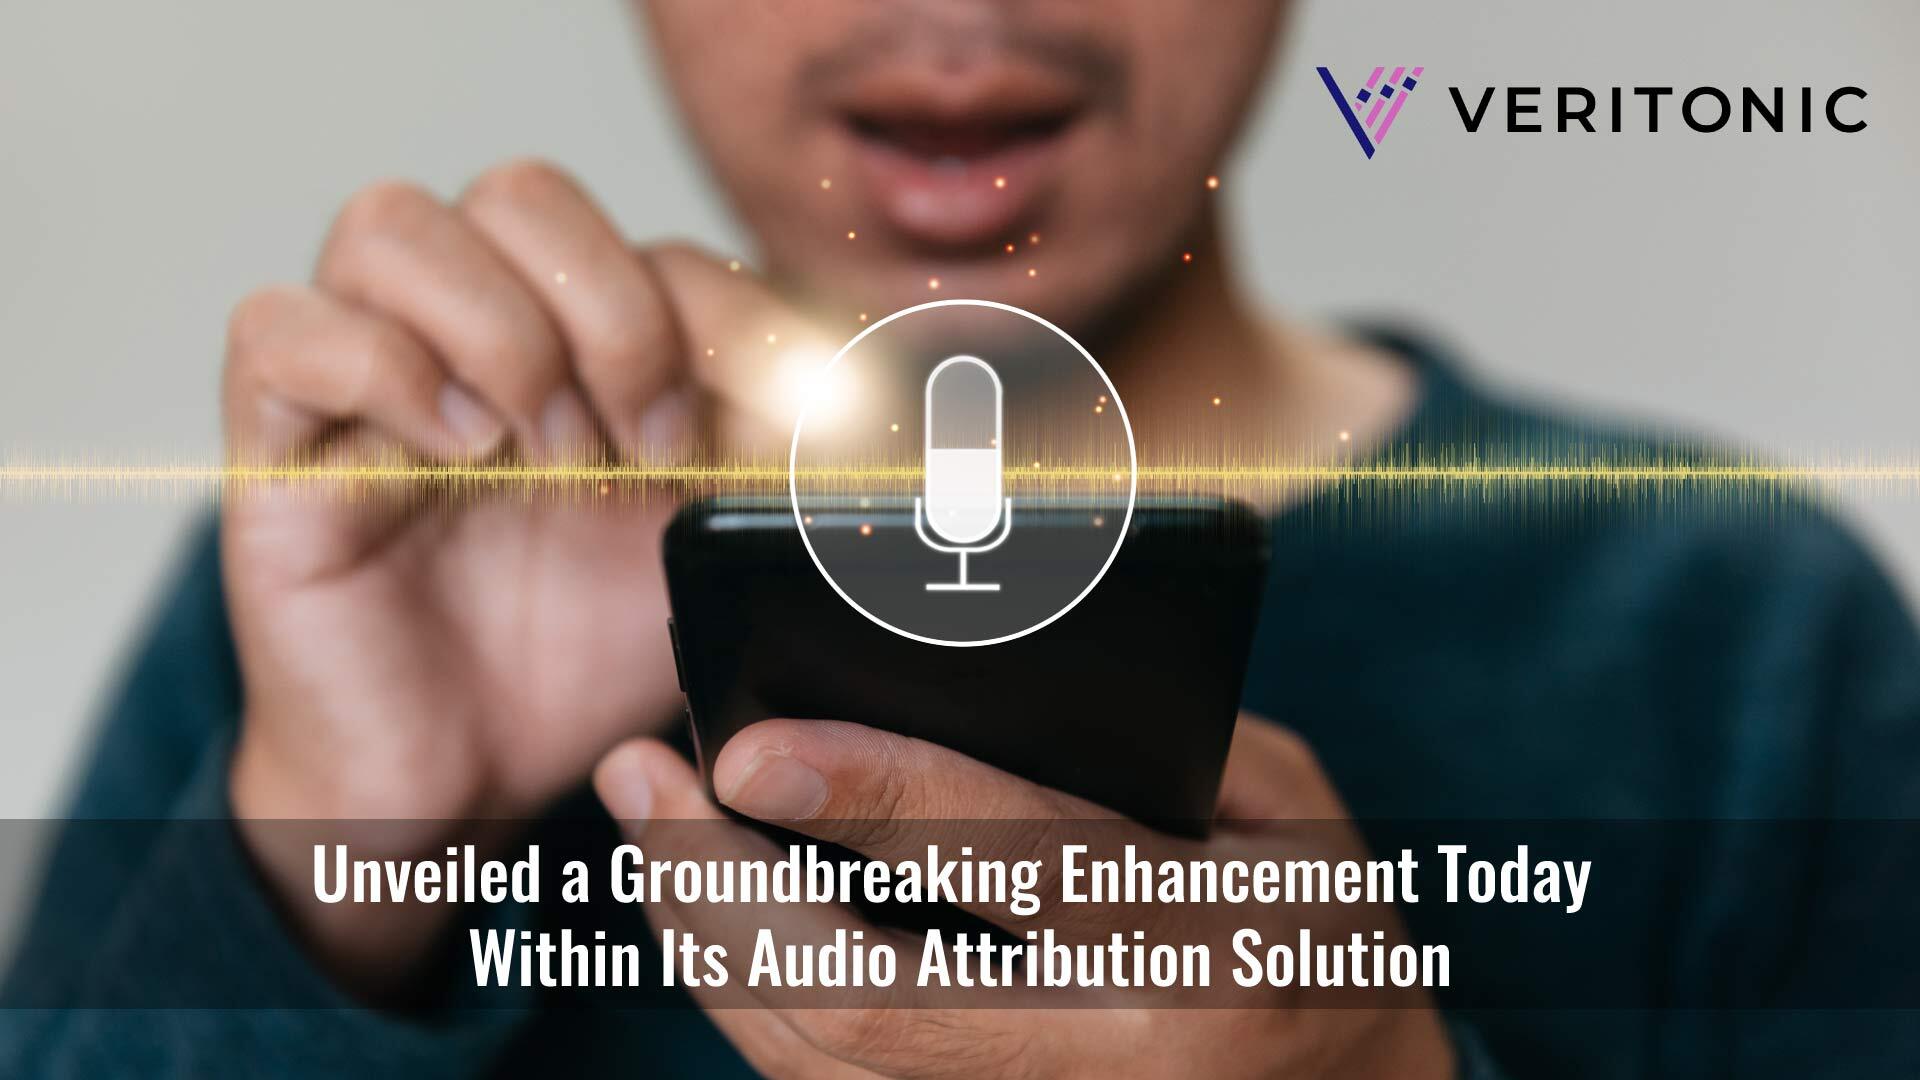 Veritonic Empowers Brands with Unprecedented Measurement of Audio and Podcast Consumption on YouTube, Unleashing Unrivaled Data